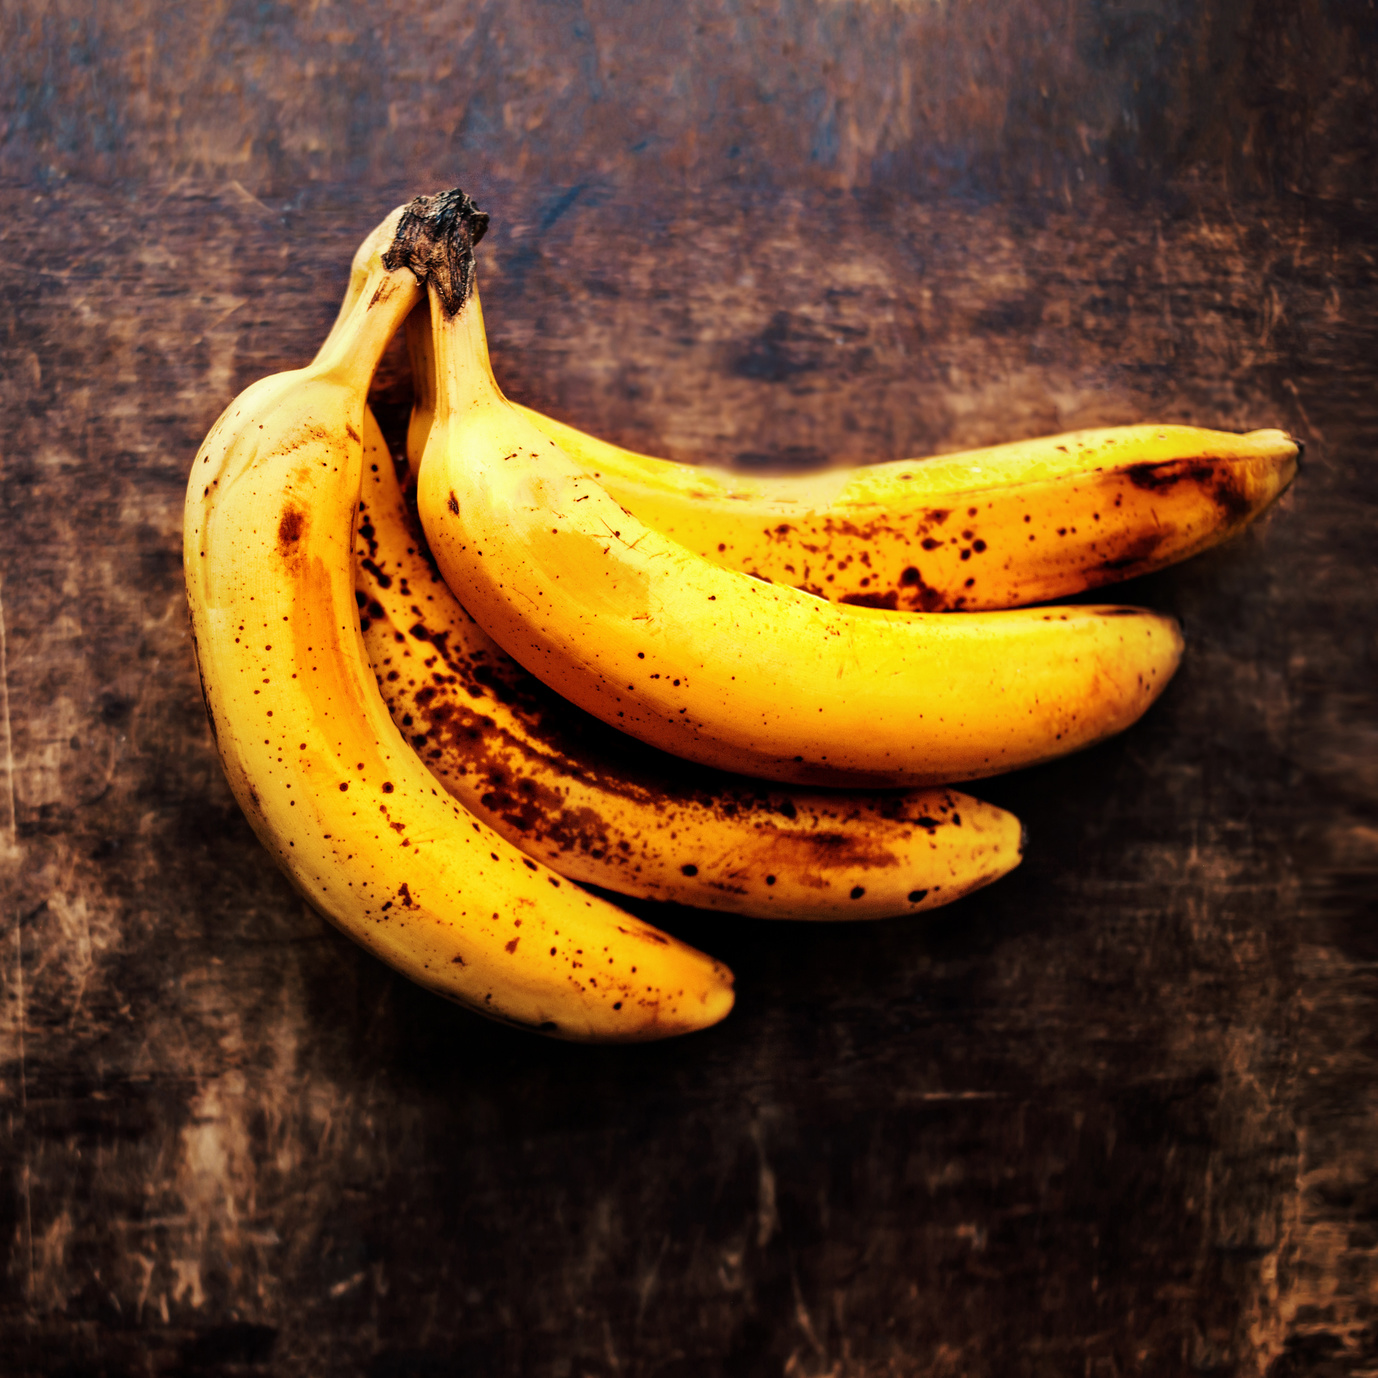 A branch of rotten ripe bananas on vintage wooden background. Overripe banana close up